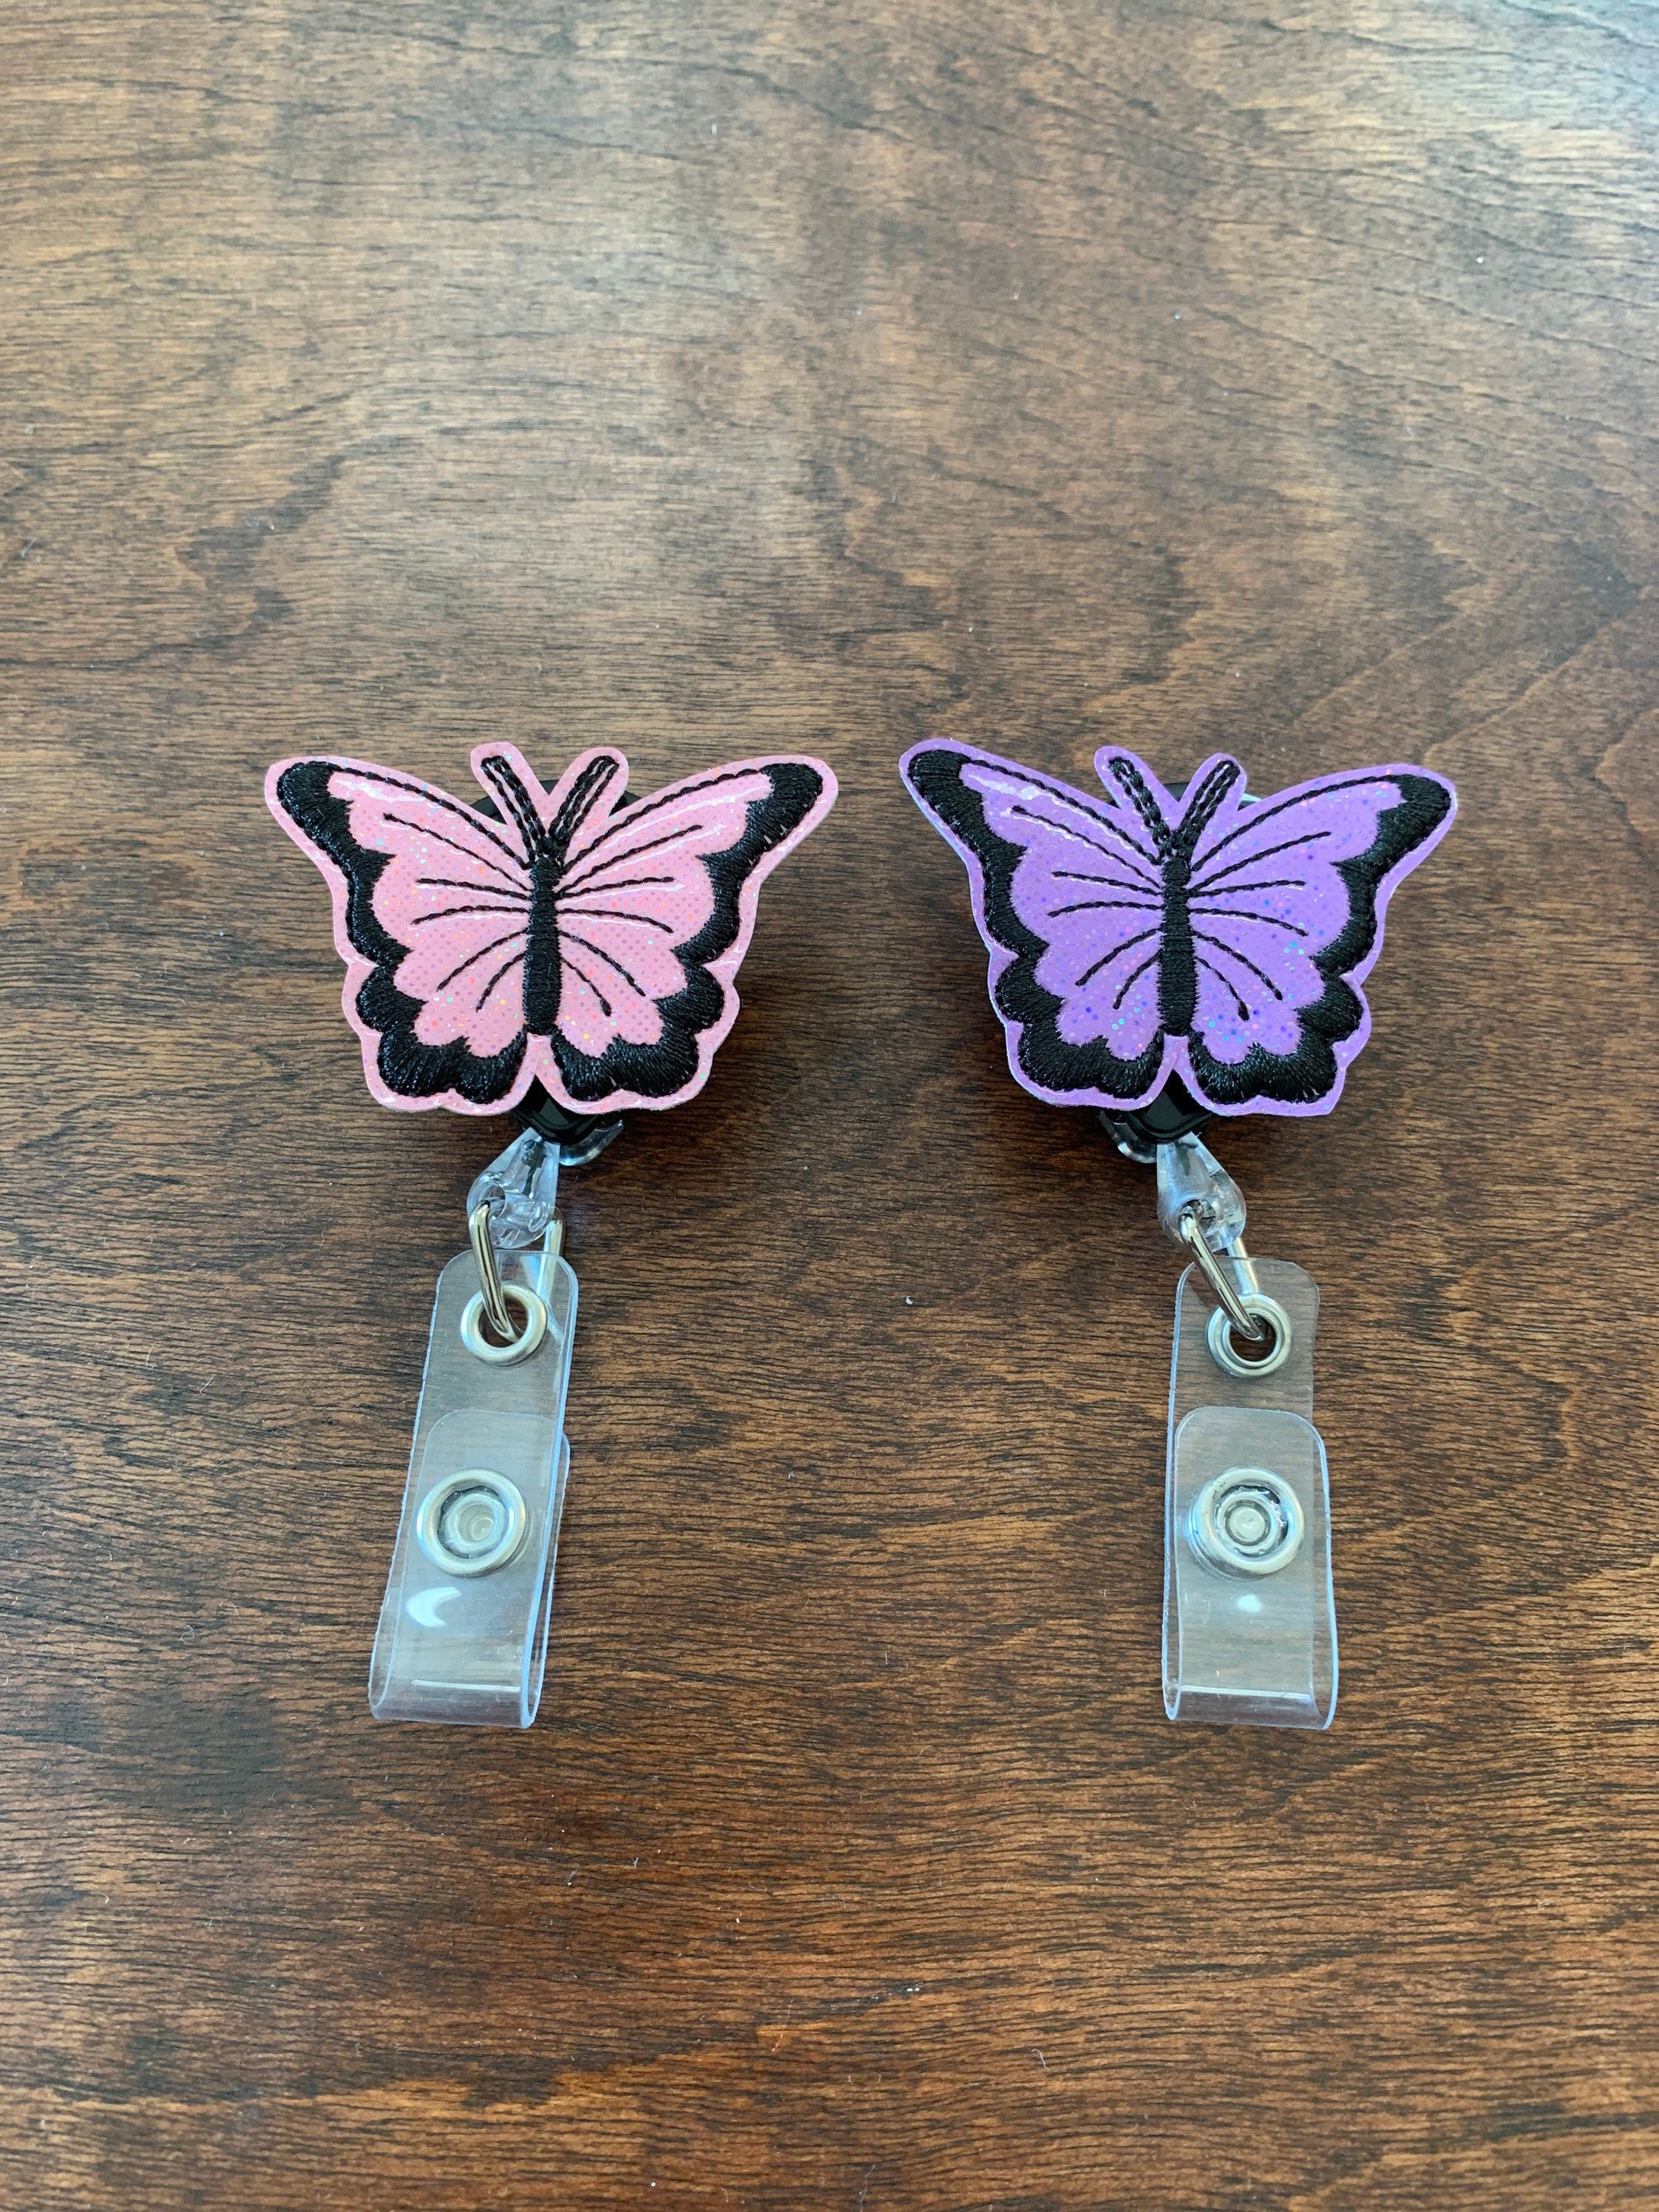 Butterfly Badge Reel – 13 Dragonfly Designs